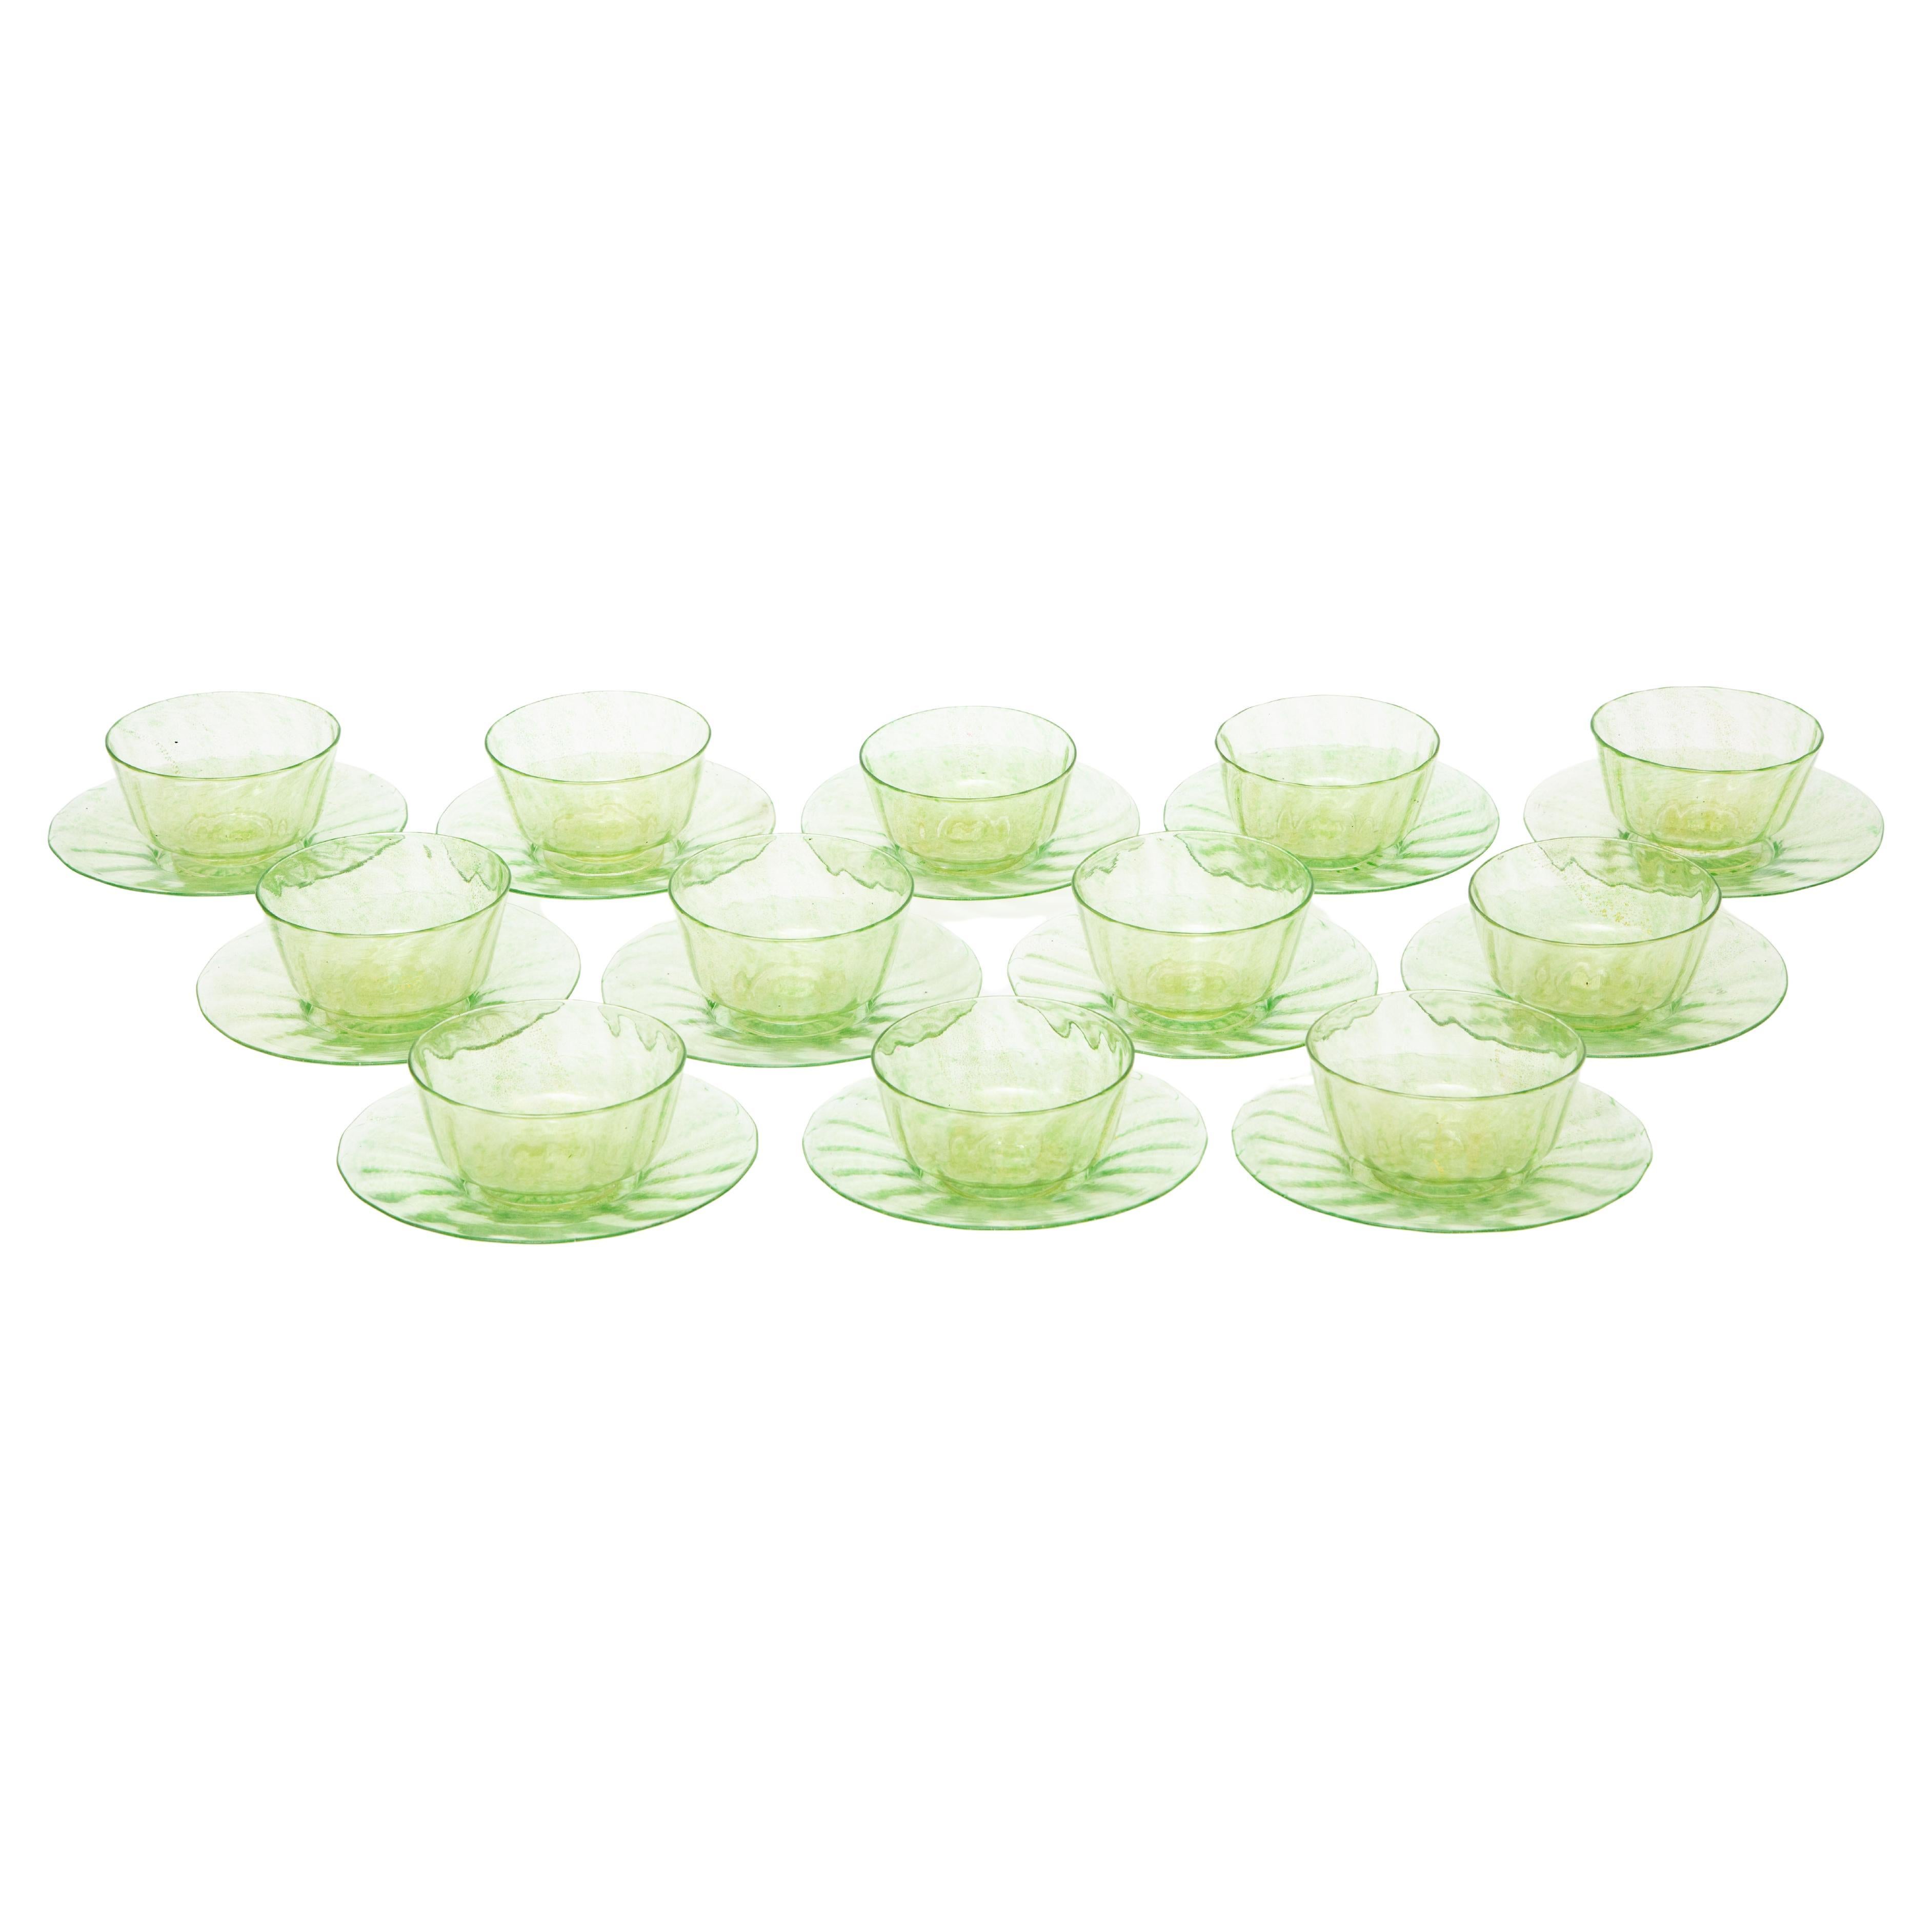 https://a.1stdibscdn.com/24-pieces-antique-venetian-glass-with-12-bowls-12-plates-salviati-circa-1920-for-sale/f_17272/f_332975121678838864622/f_33297512_1678838865949_bg_processed.jpg